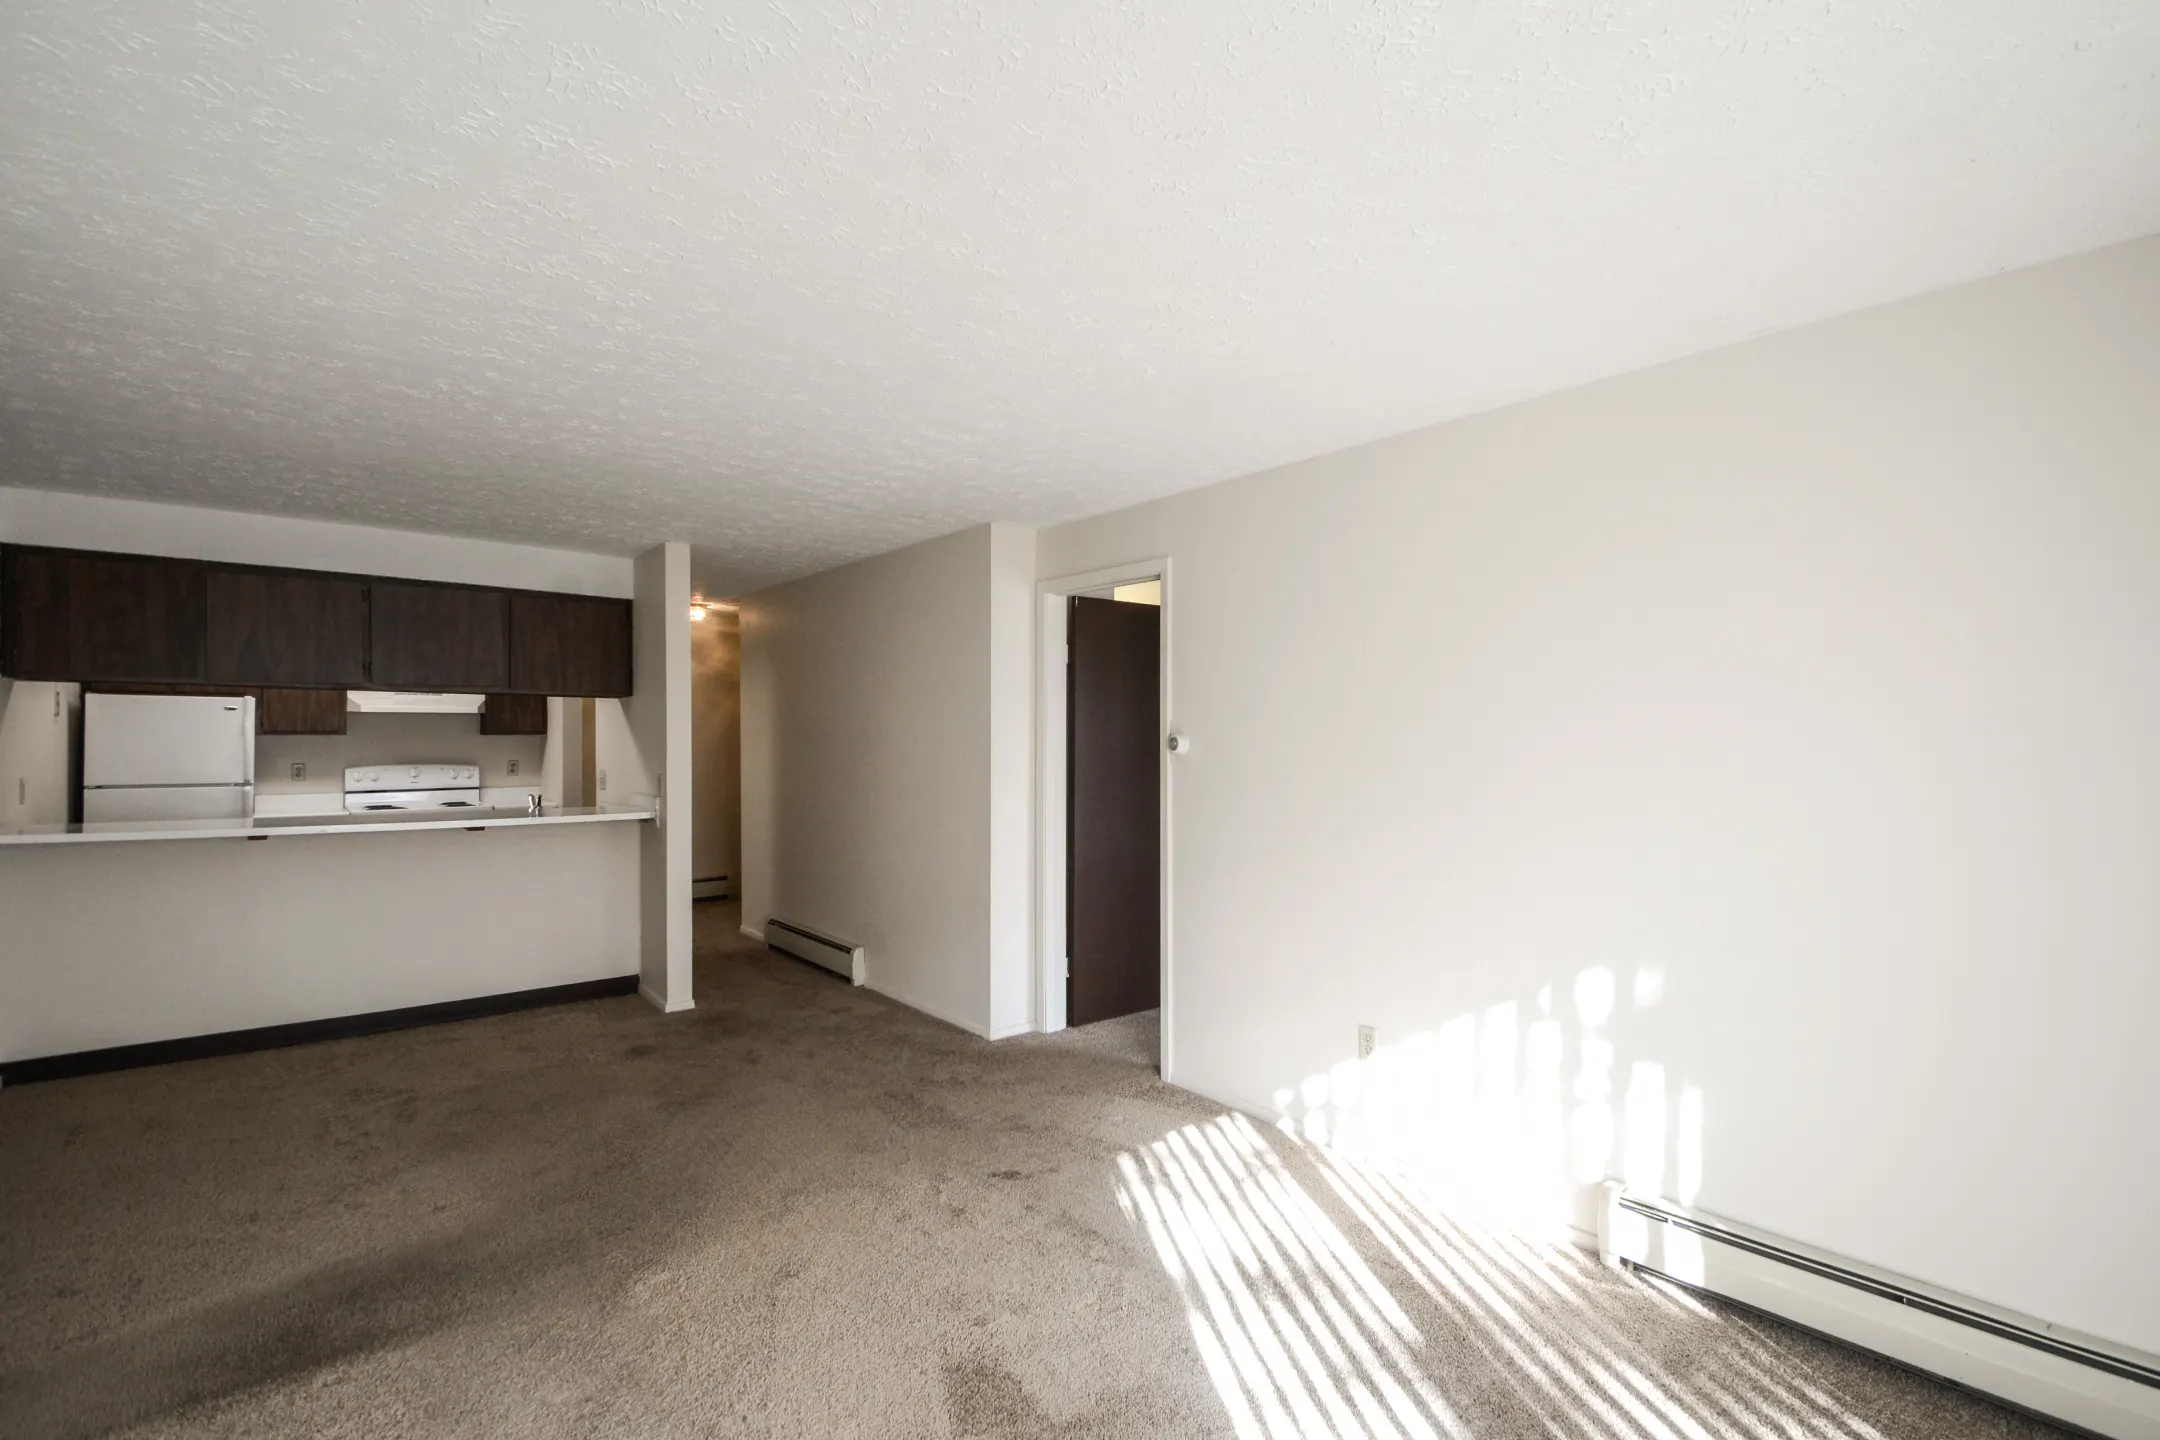 Foxes Lair Apartments - Elyria, OH